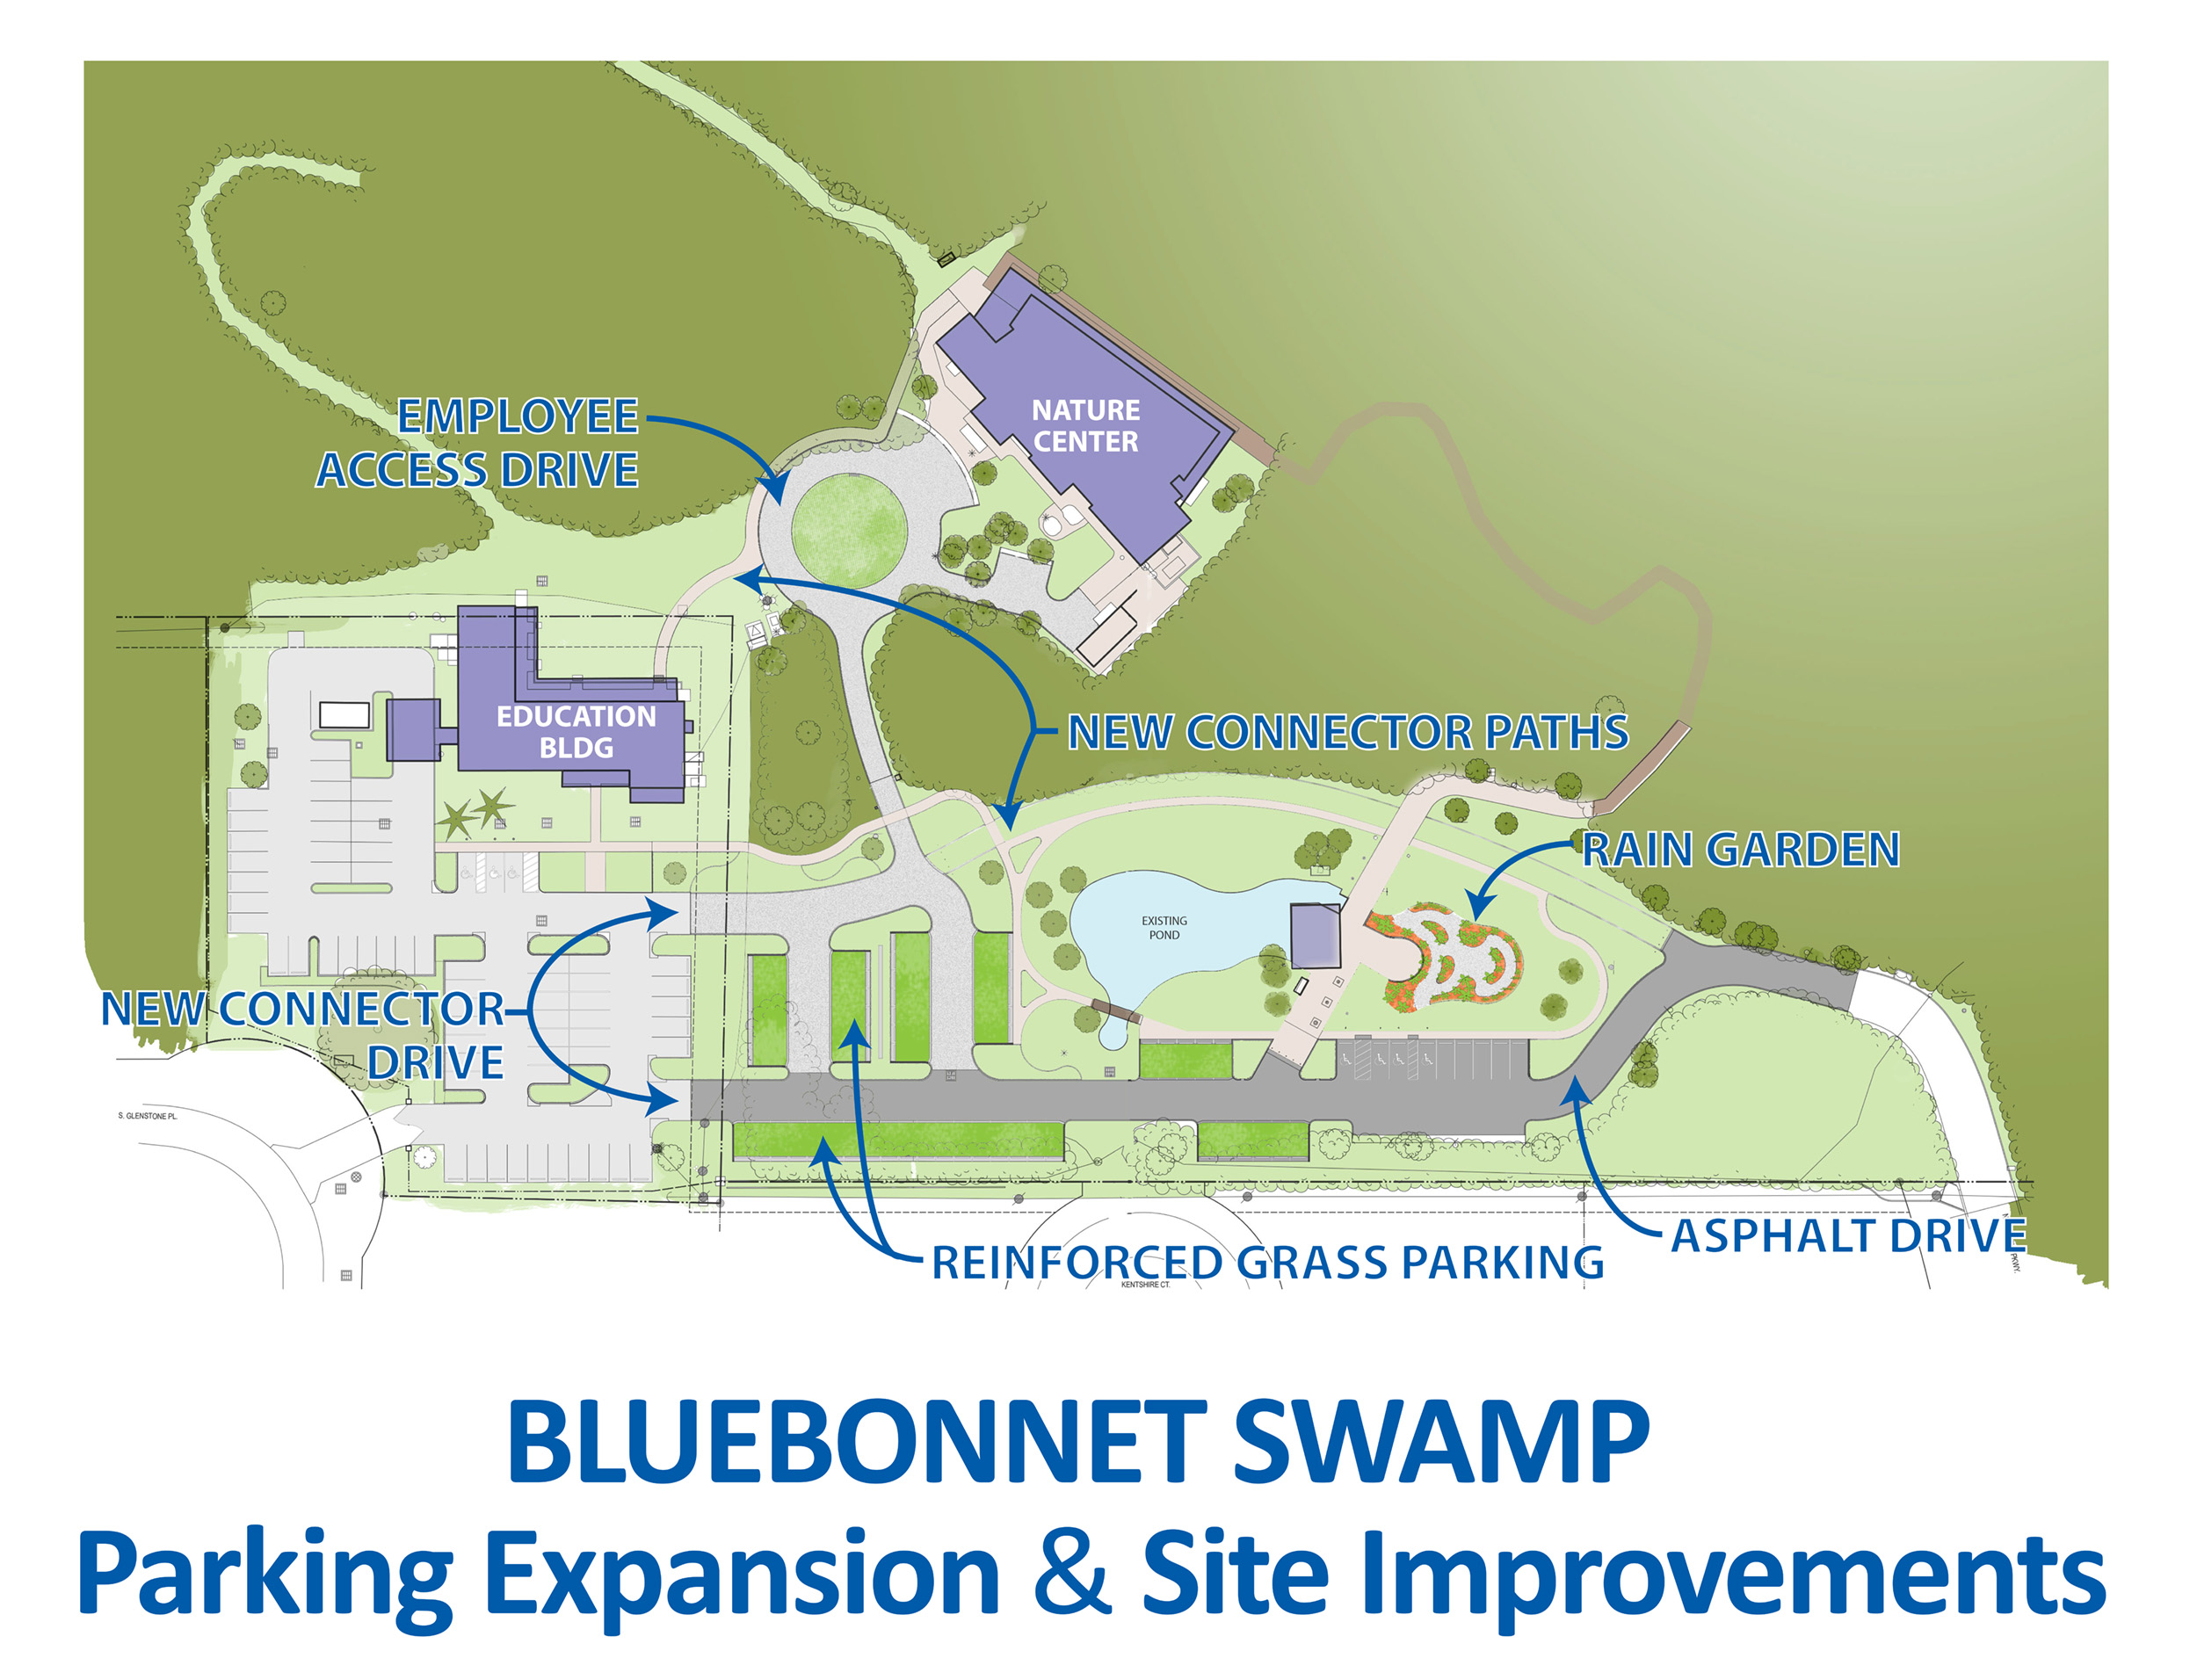 Bluebonnet Swamp improvements rendering and layout